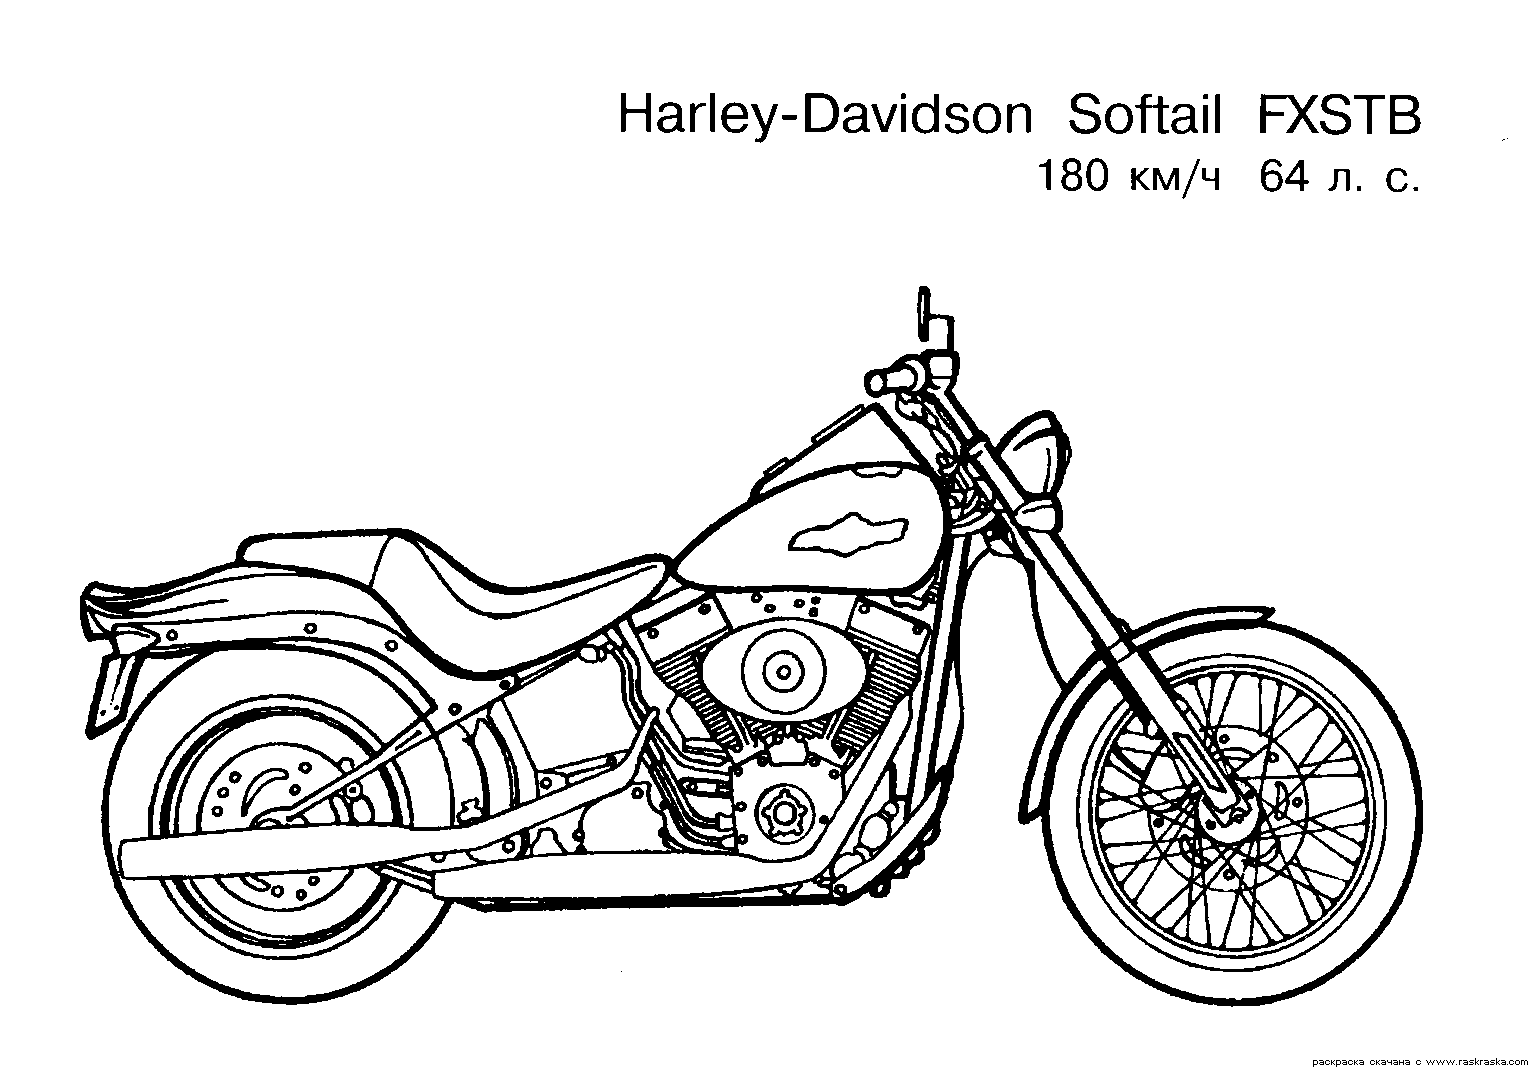  Free Motorcycle coloring page, letscoloringpages.com, Harley Davidson Softail